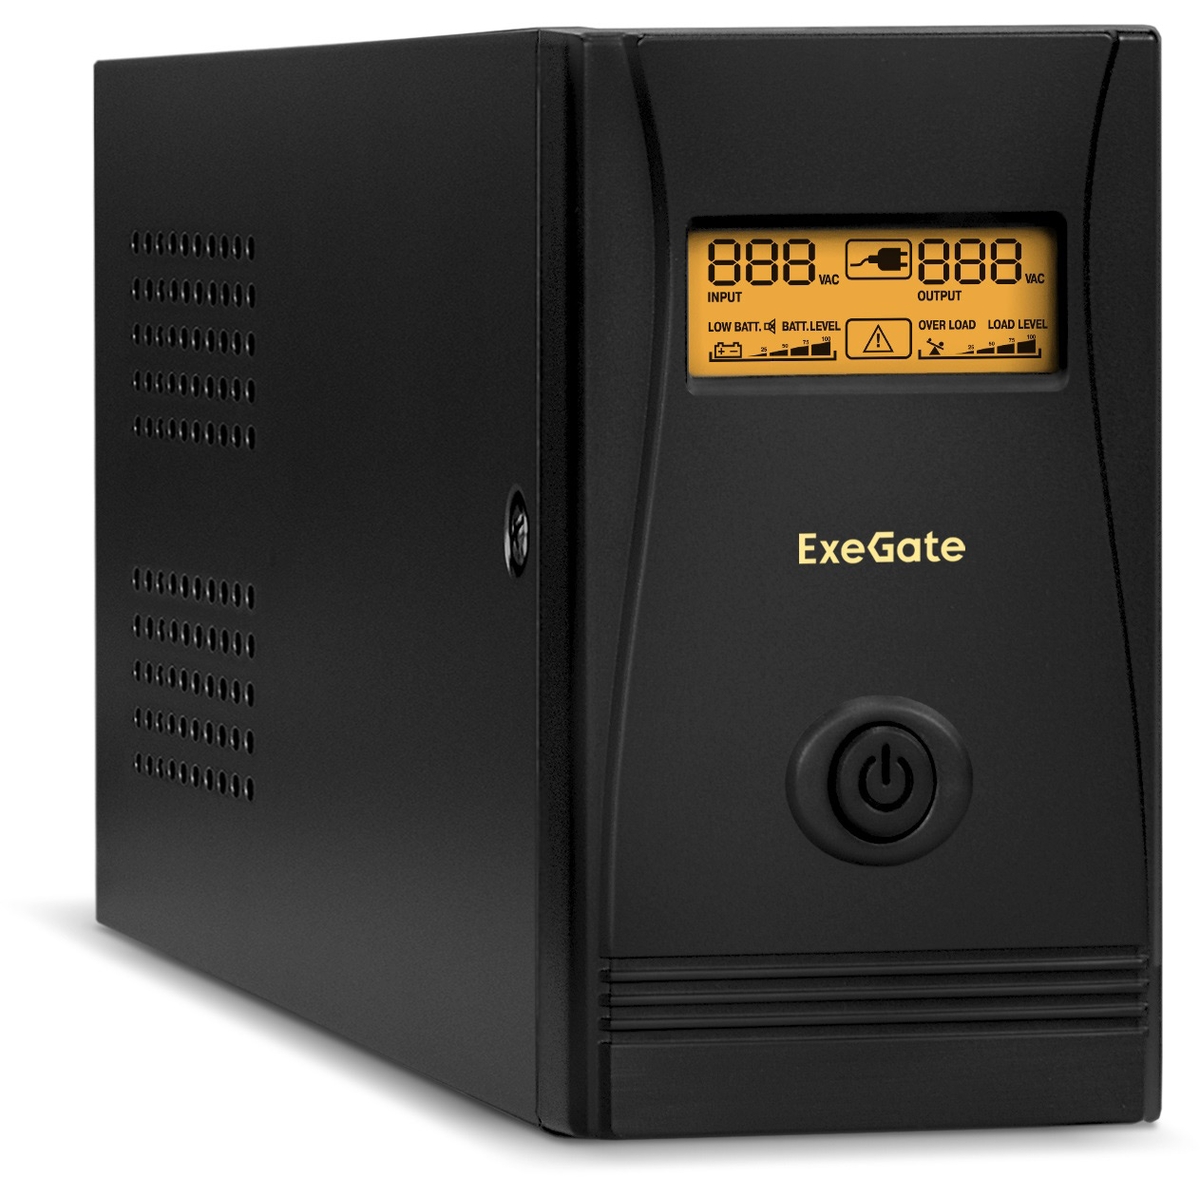  ExeGate SpecialPro Smart LLB-650.LCD.AVR.2SH